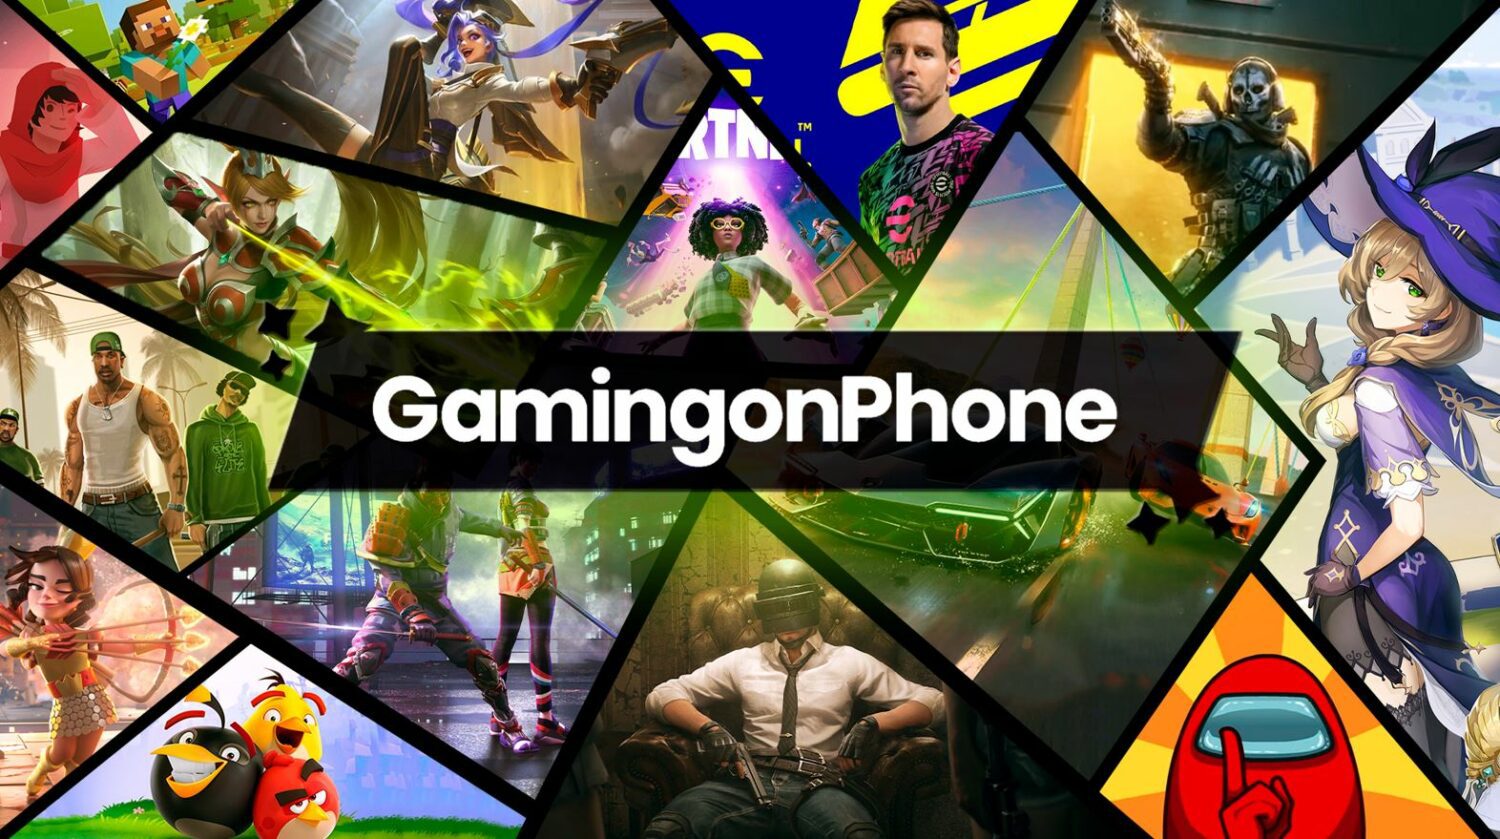 Gamingonphone, gamingonphone.com, gamingonphone banner, gaming on phone